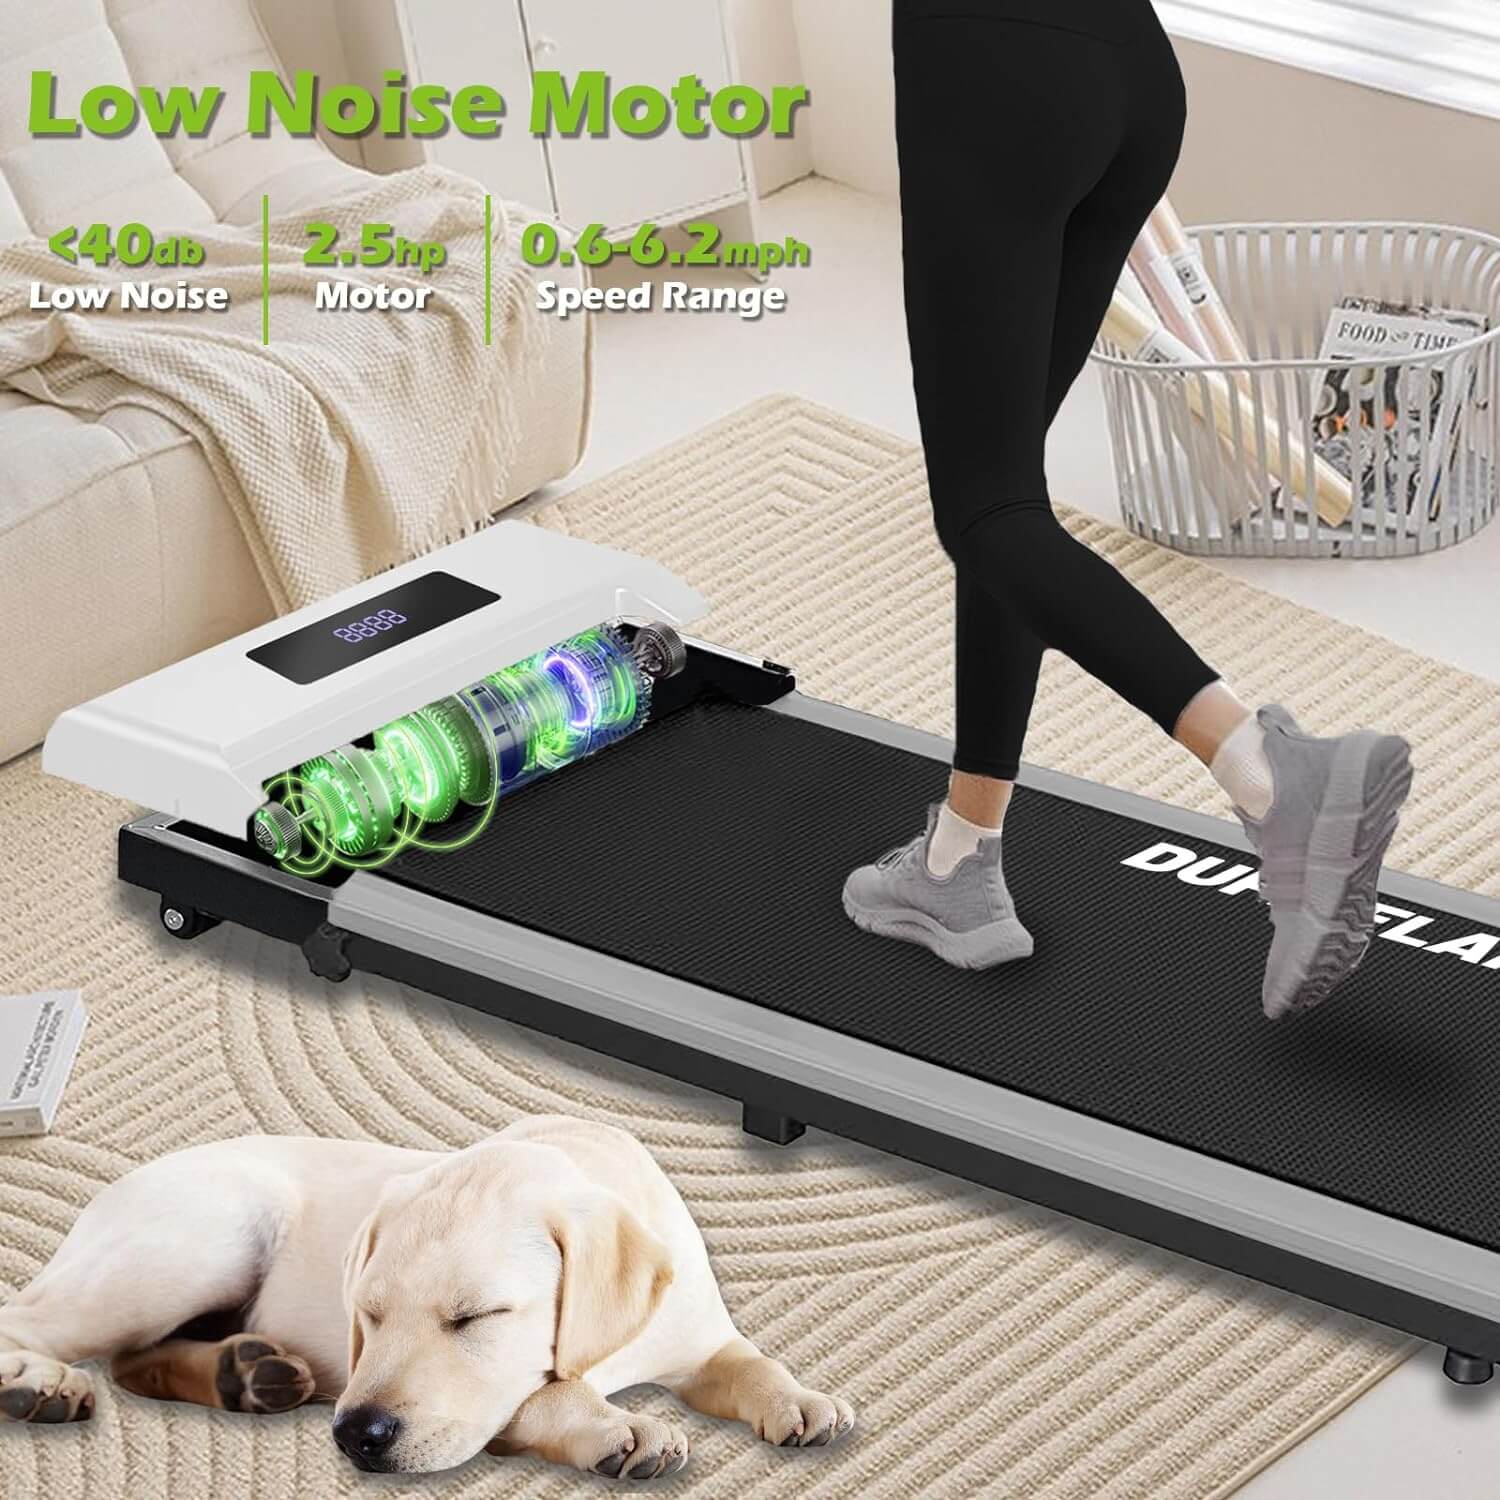 DUPLIFLARE Walking Pad With Incline product description about low noise motor(less than 40db).